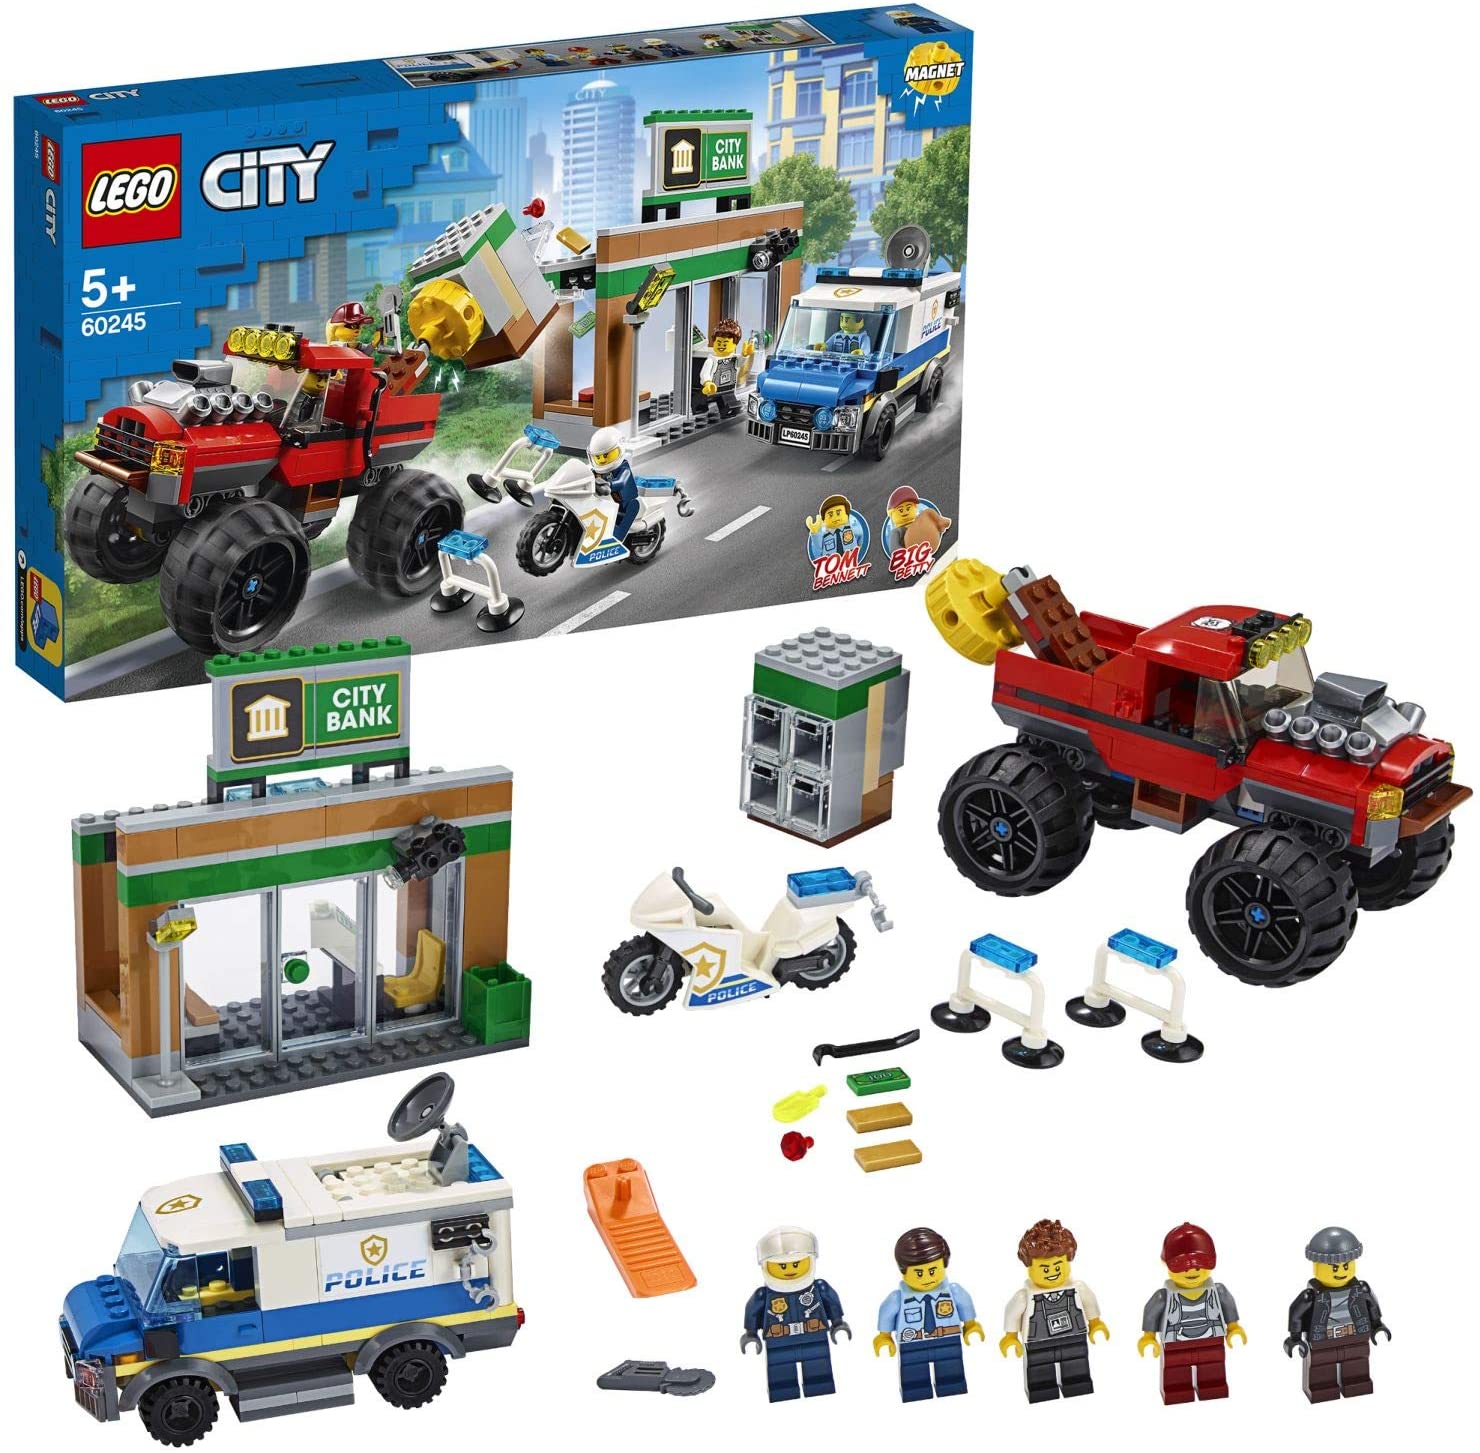 Lego 60245-Robbery With A Monster Truck, City, Construction Kit